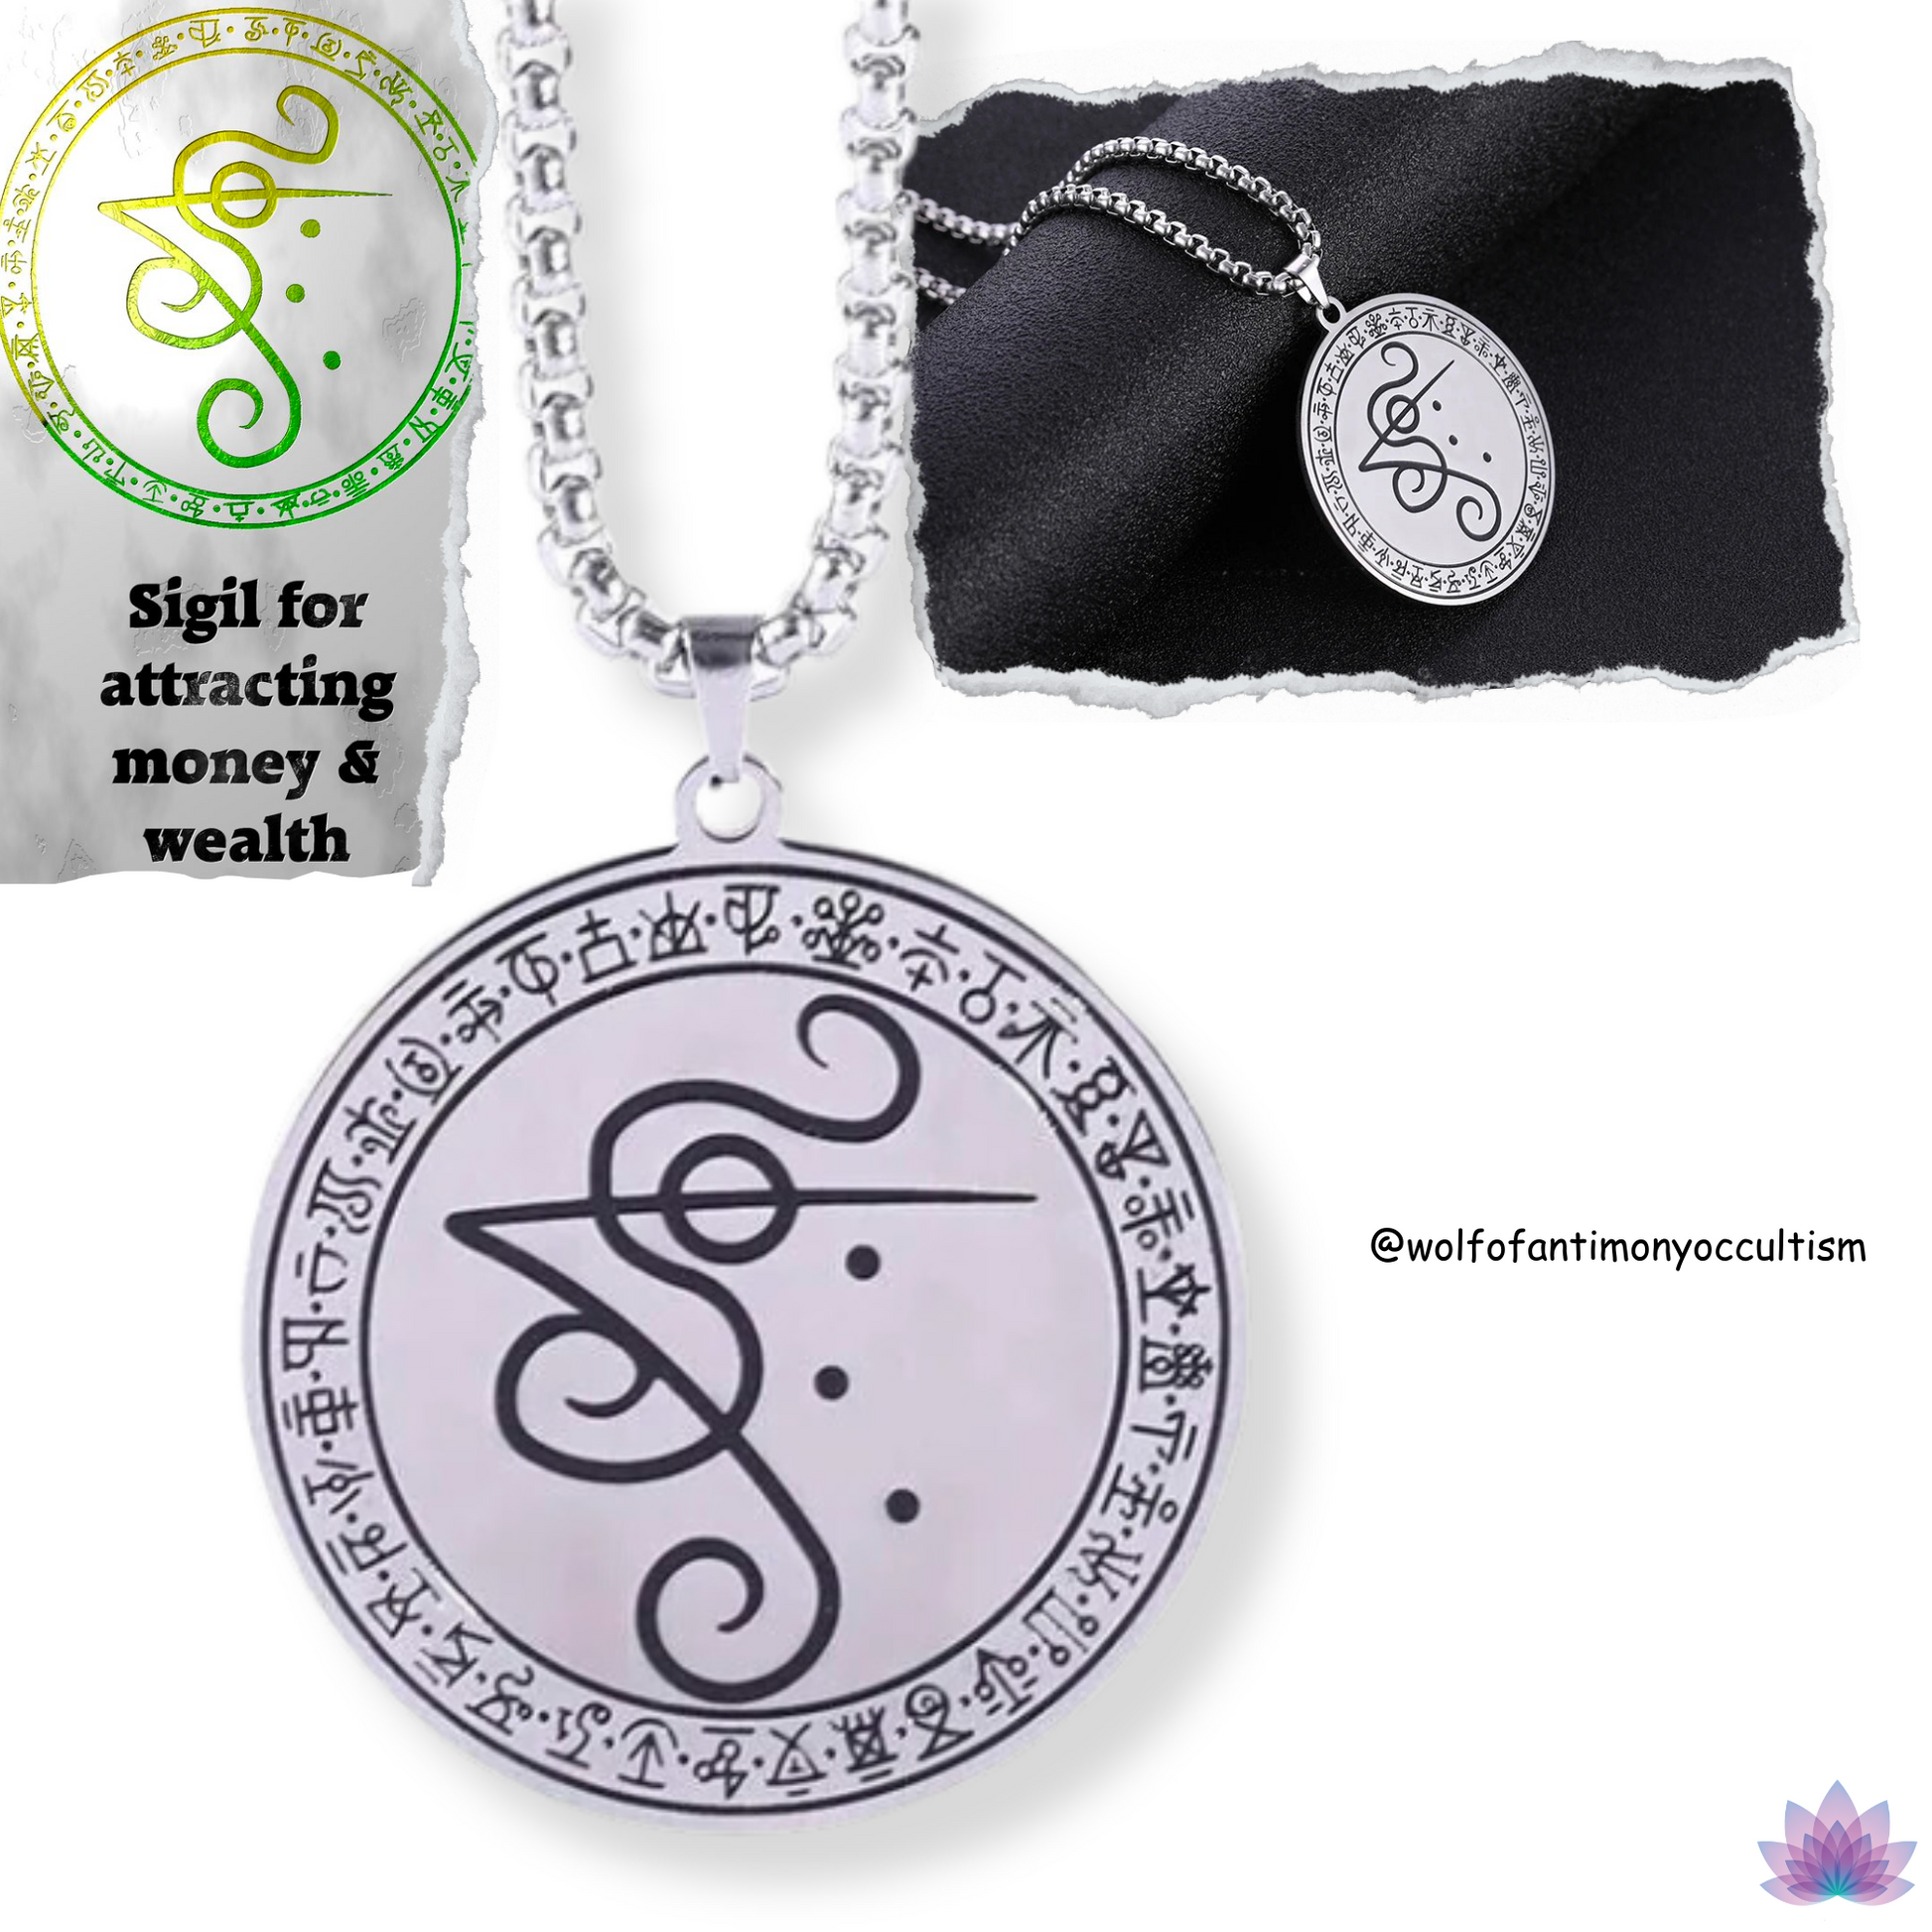 Wolf Of Antimony's Money Success Sigil Necklace • Wealth Luck Attraction Viadescioism Pendant • Witchy Chaos Magick Amulet • Neo-Pagan Witch Talisman • Apollo Tarot Shop